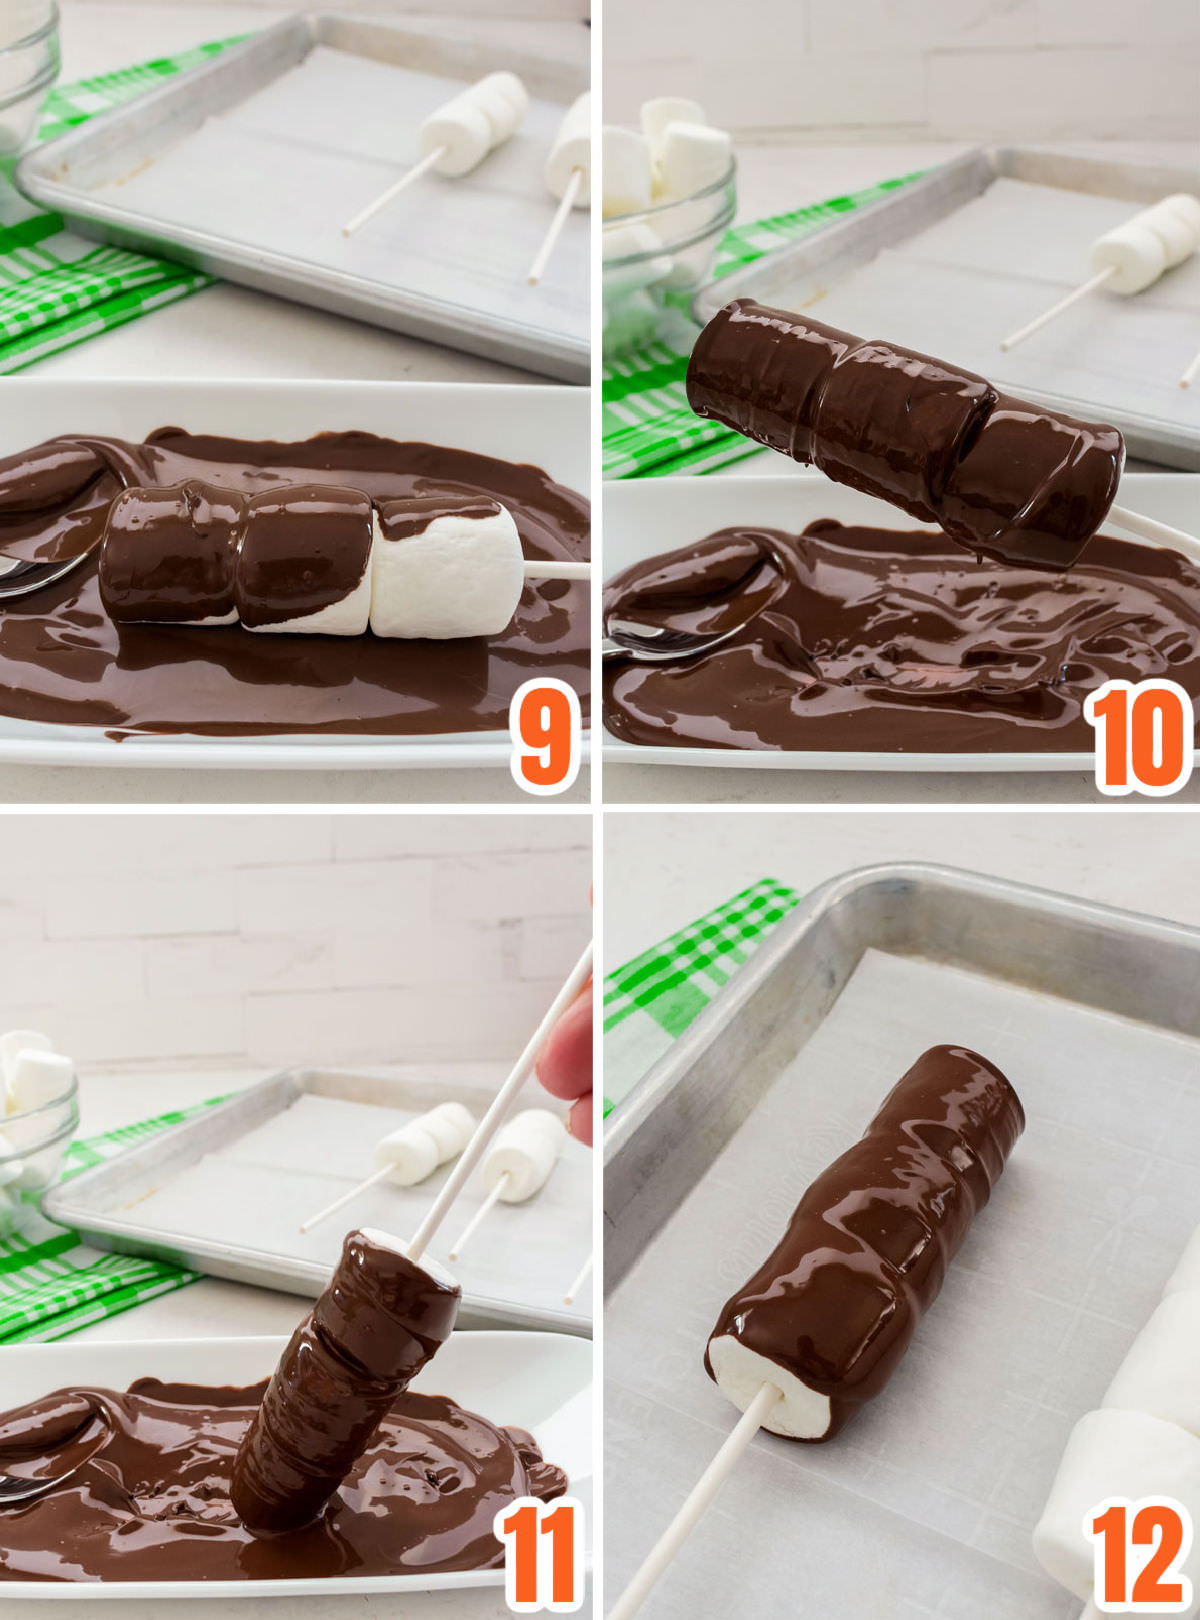 Collage image showing the steps for covering the marshmallow pop with chocolate.